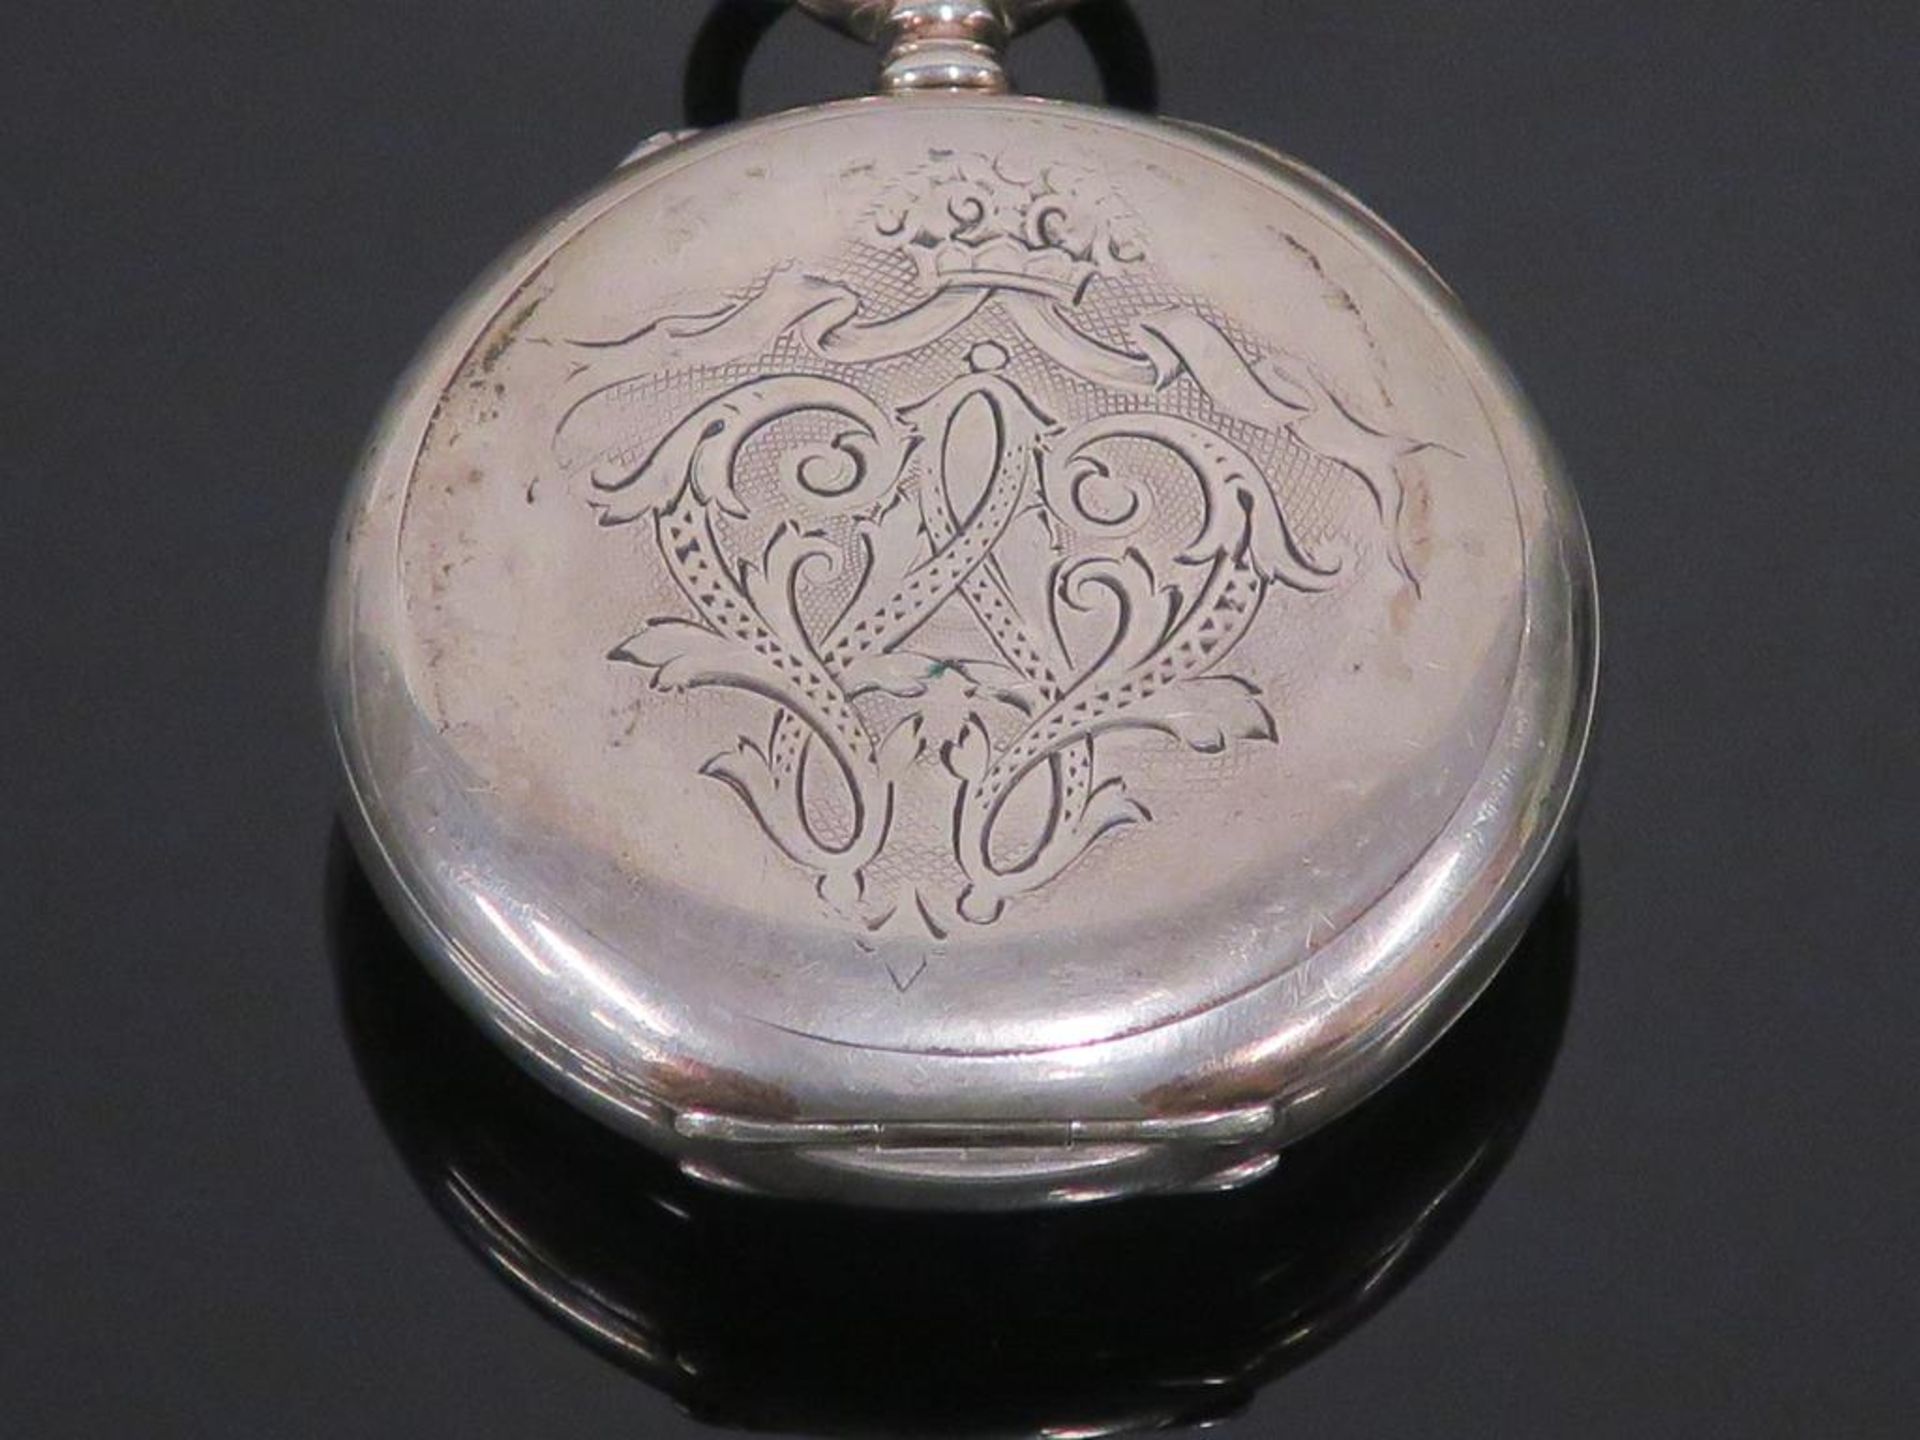 A Fine Silver Pocket Watch Hallmarked with 0.800, 1327426, a Grouse, a German Crescent Moon and - Image 7 of 7